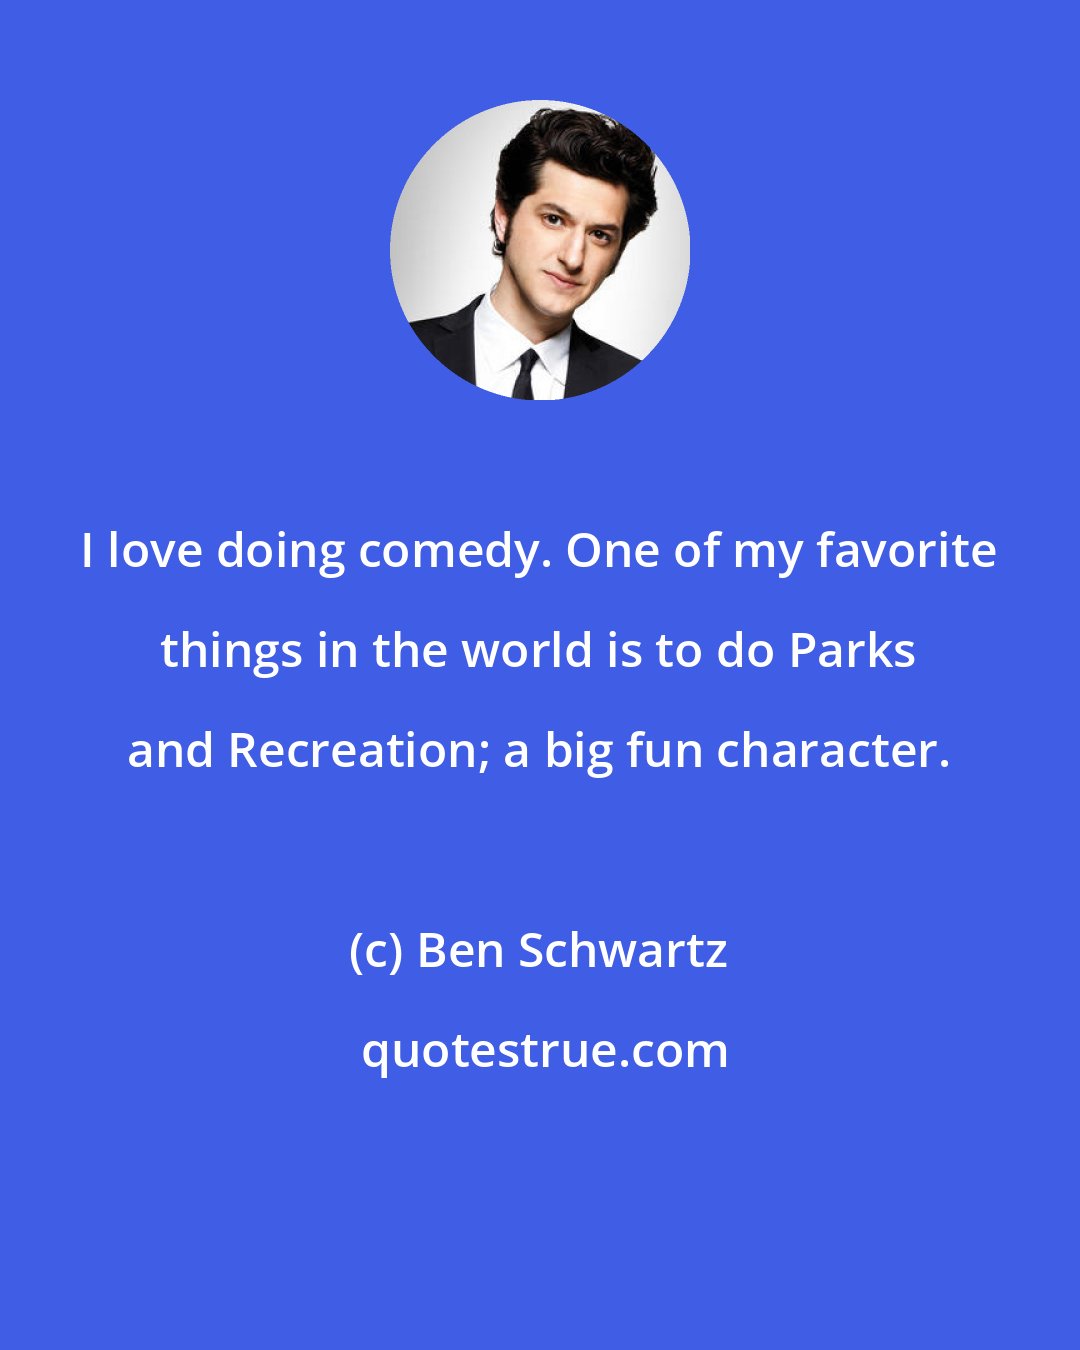 Ben Schwartz: I love doing comedy. One of my favorite things in the world is to do Parks and Recreation; a big fun character.